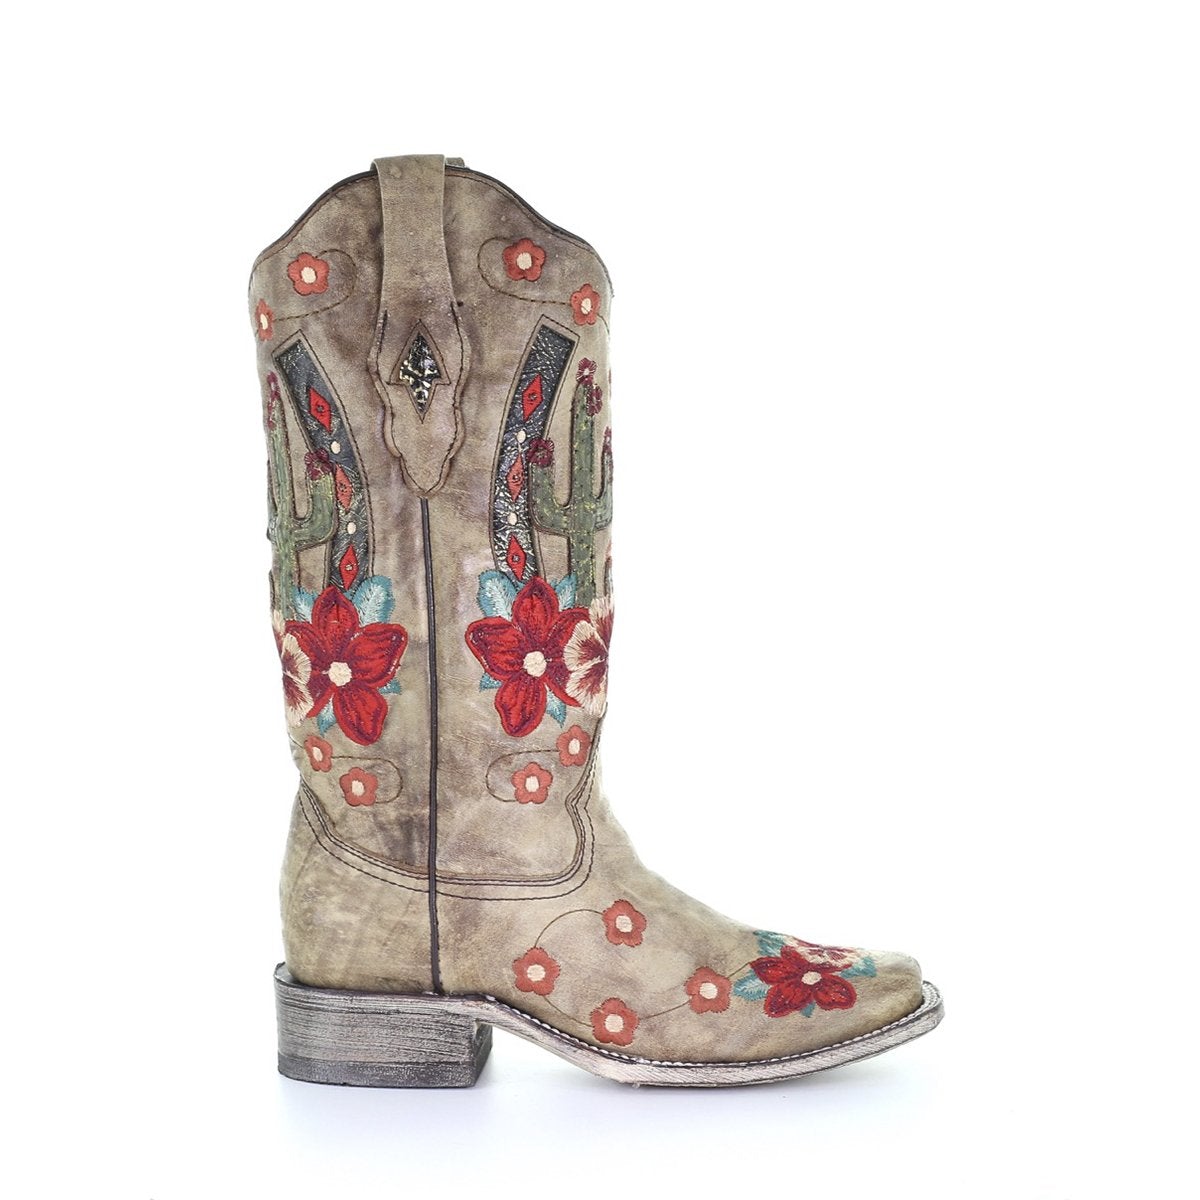 A3769 LD TAUPE CACTUS OVERLAY & FLOWERED EMBROIDERY SQ. TOE-Kuet.us